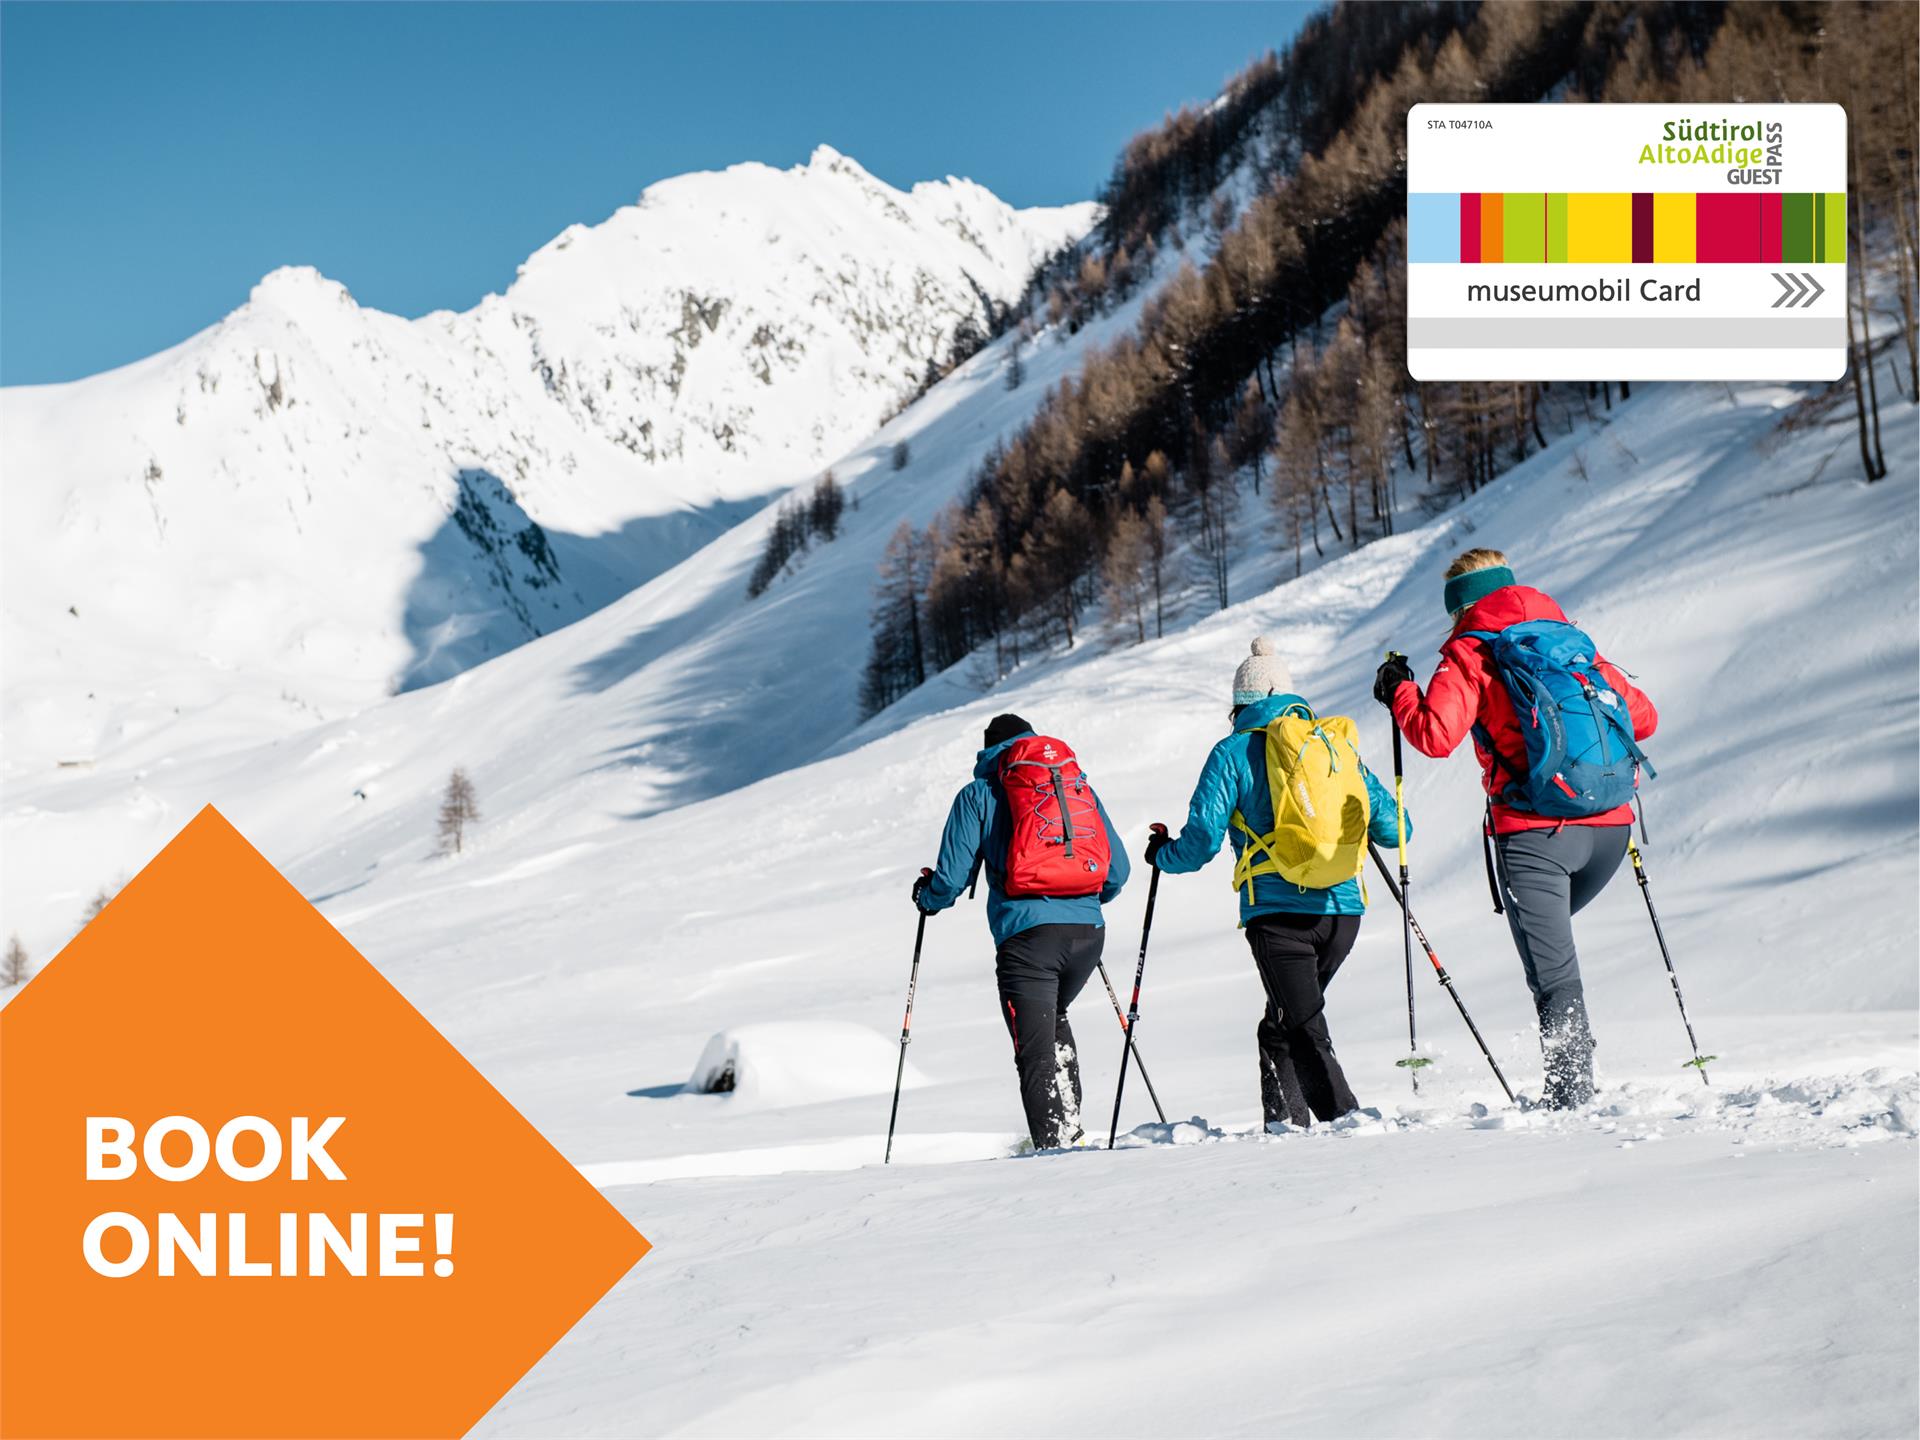 GUEST PASS | Guided snowshoe tour in the Ahrntal mountains Ahrntal/Valle Aurina 1 suedtirol.info